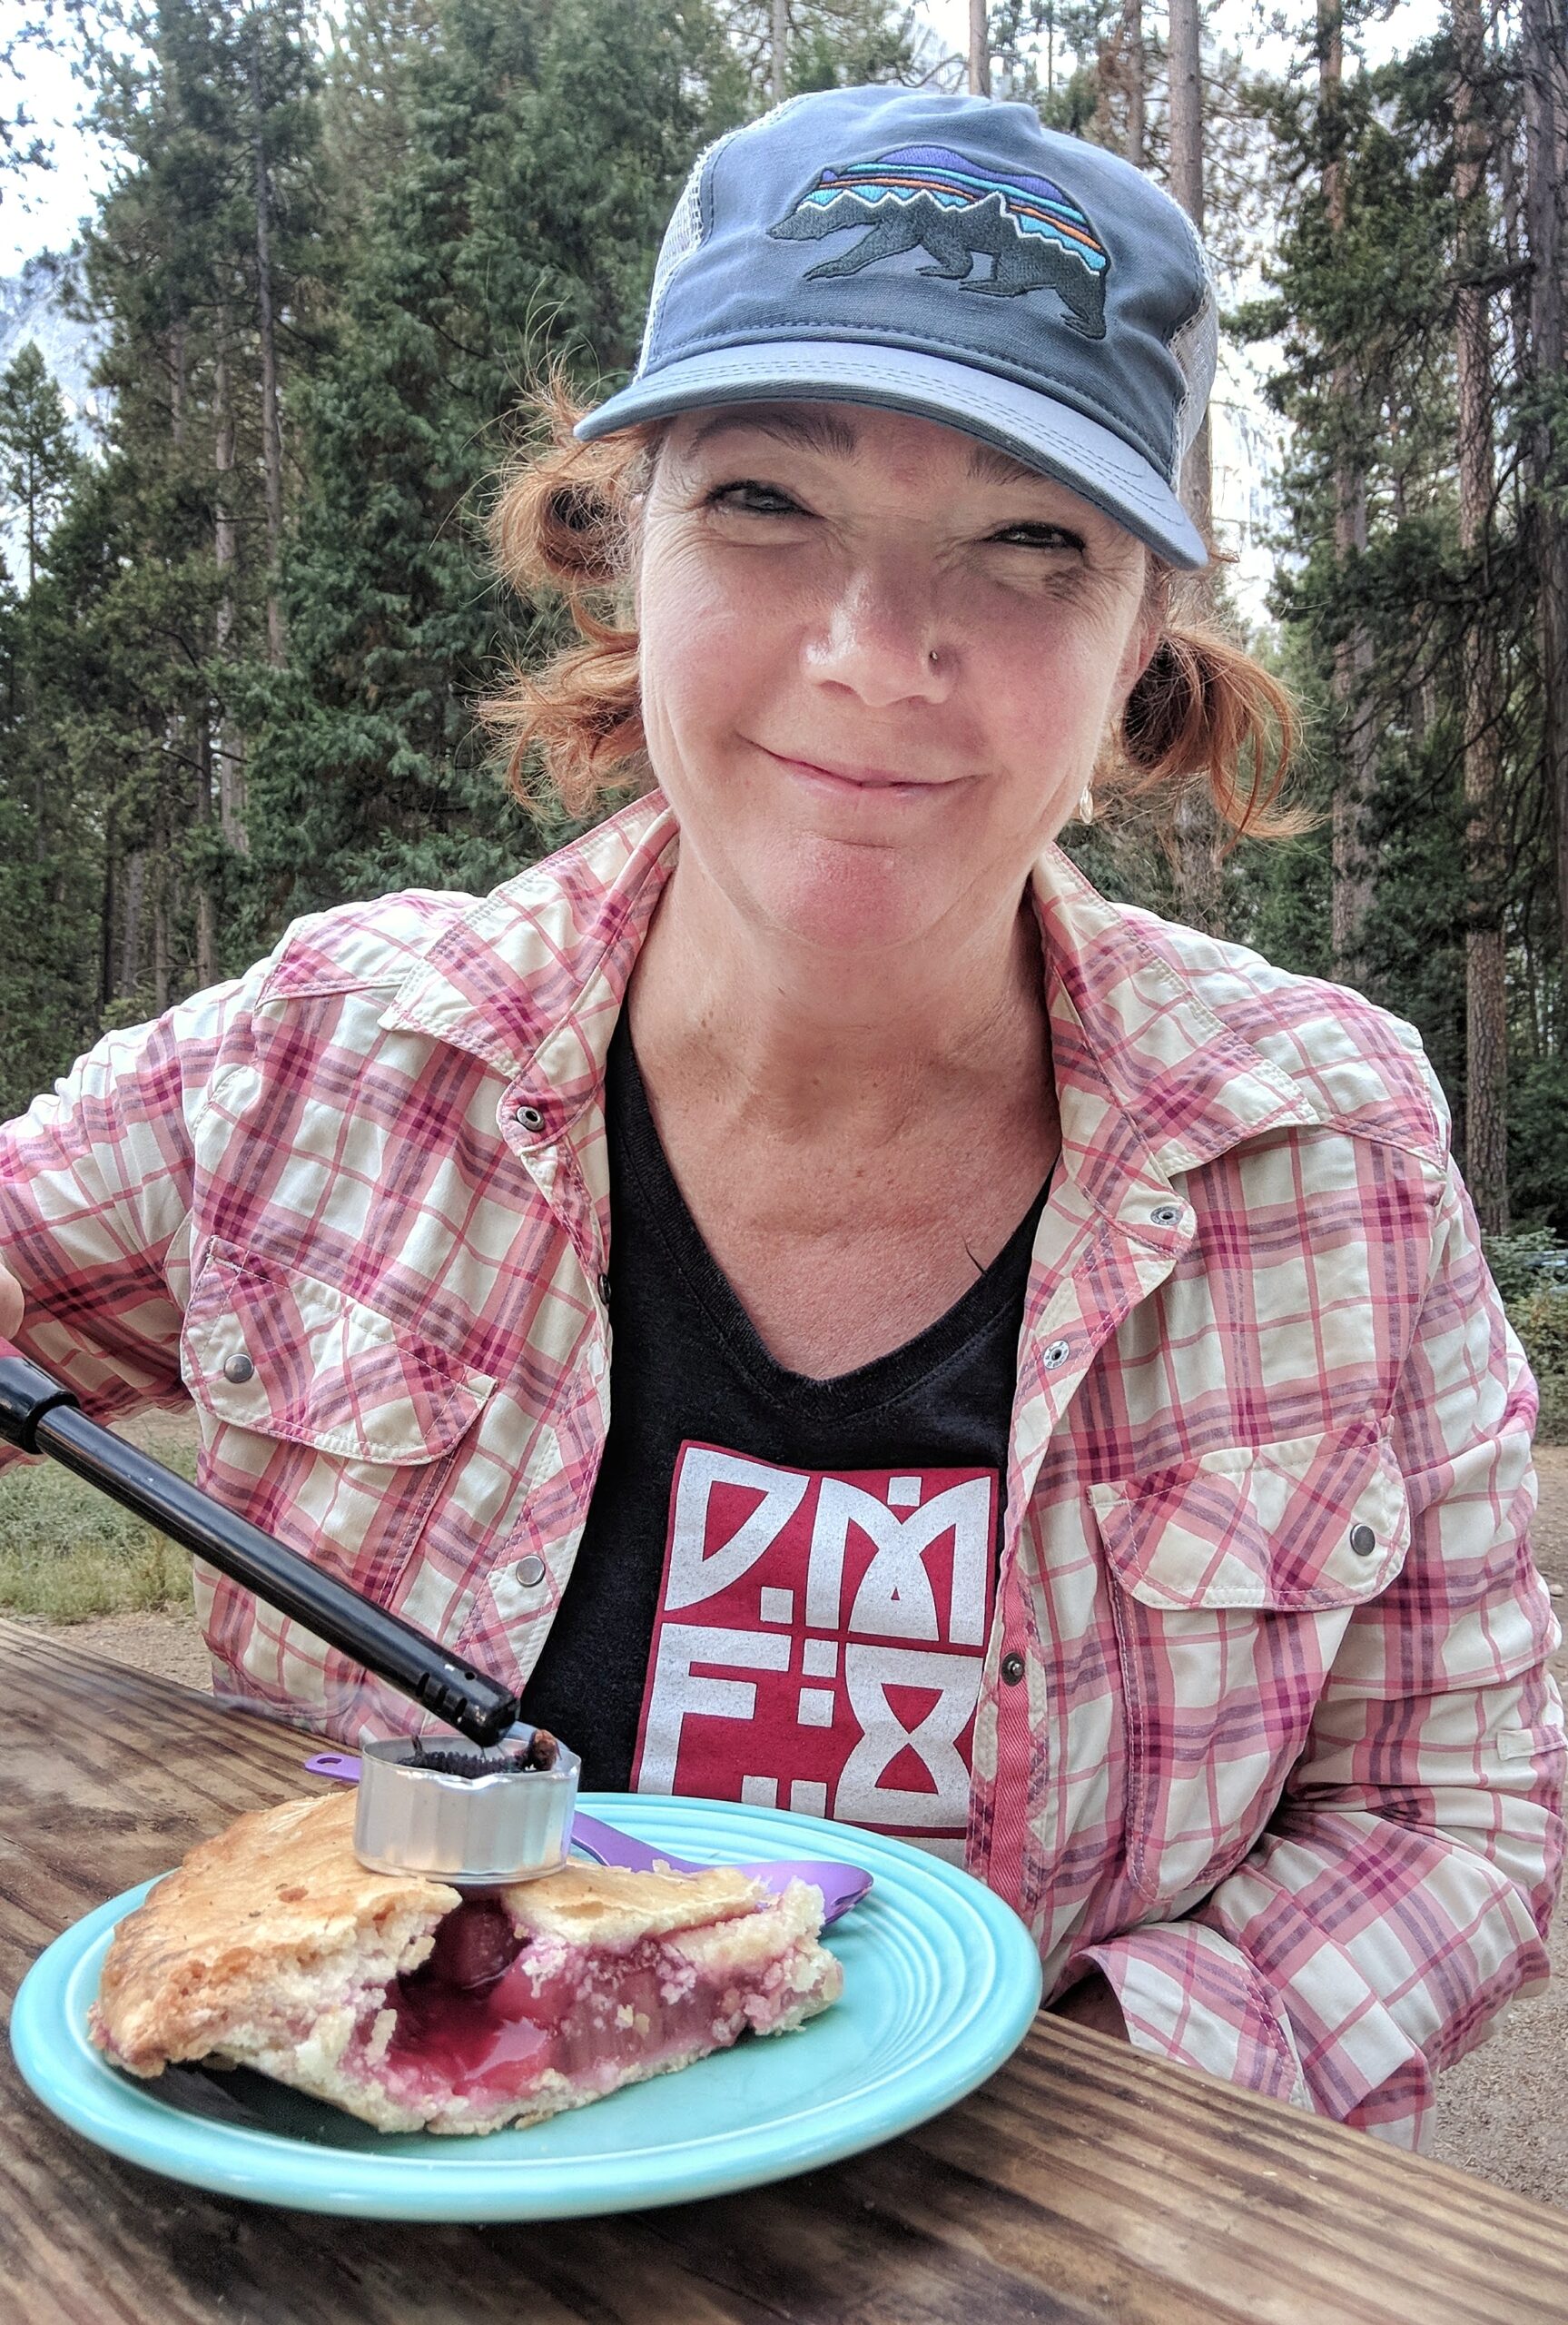 Amy George celebrating her 49th birthday in Yosemite, at Lower Pines campground.